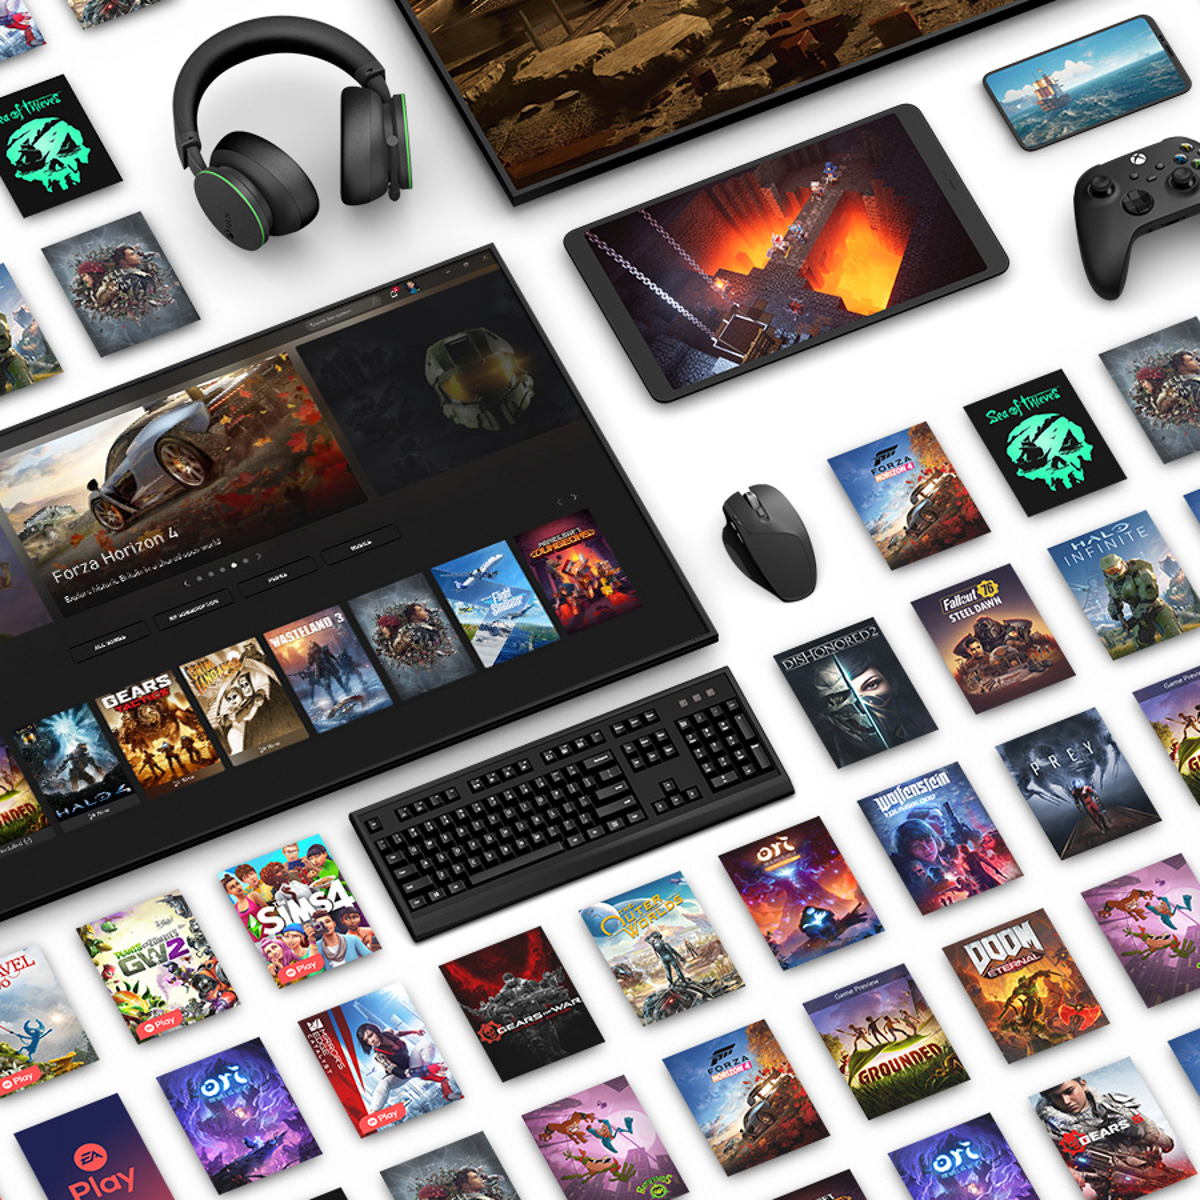 Xbox Game Pass Earnings Revealed In Court Documents